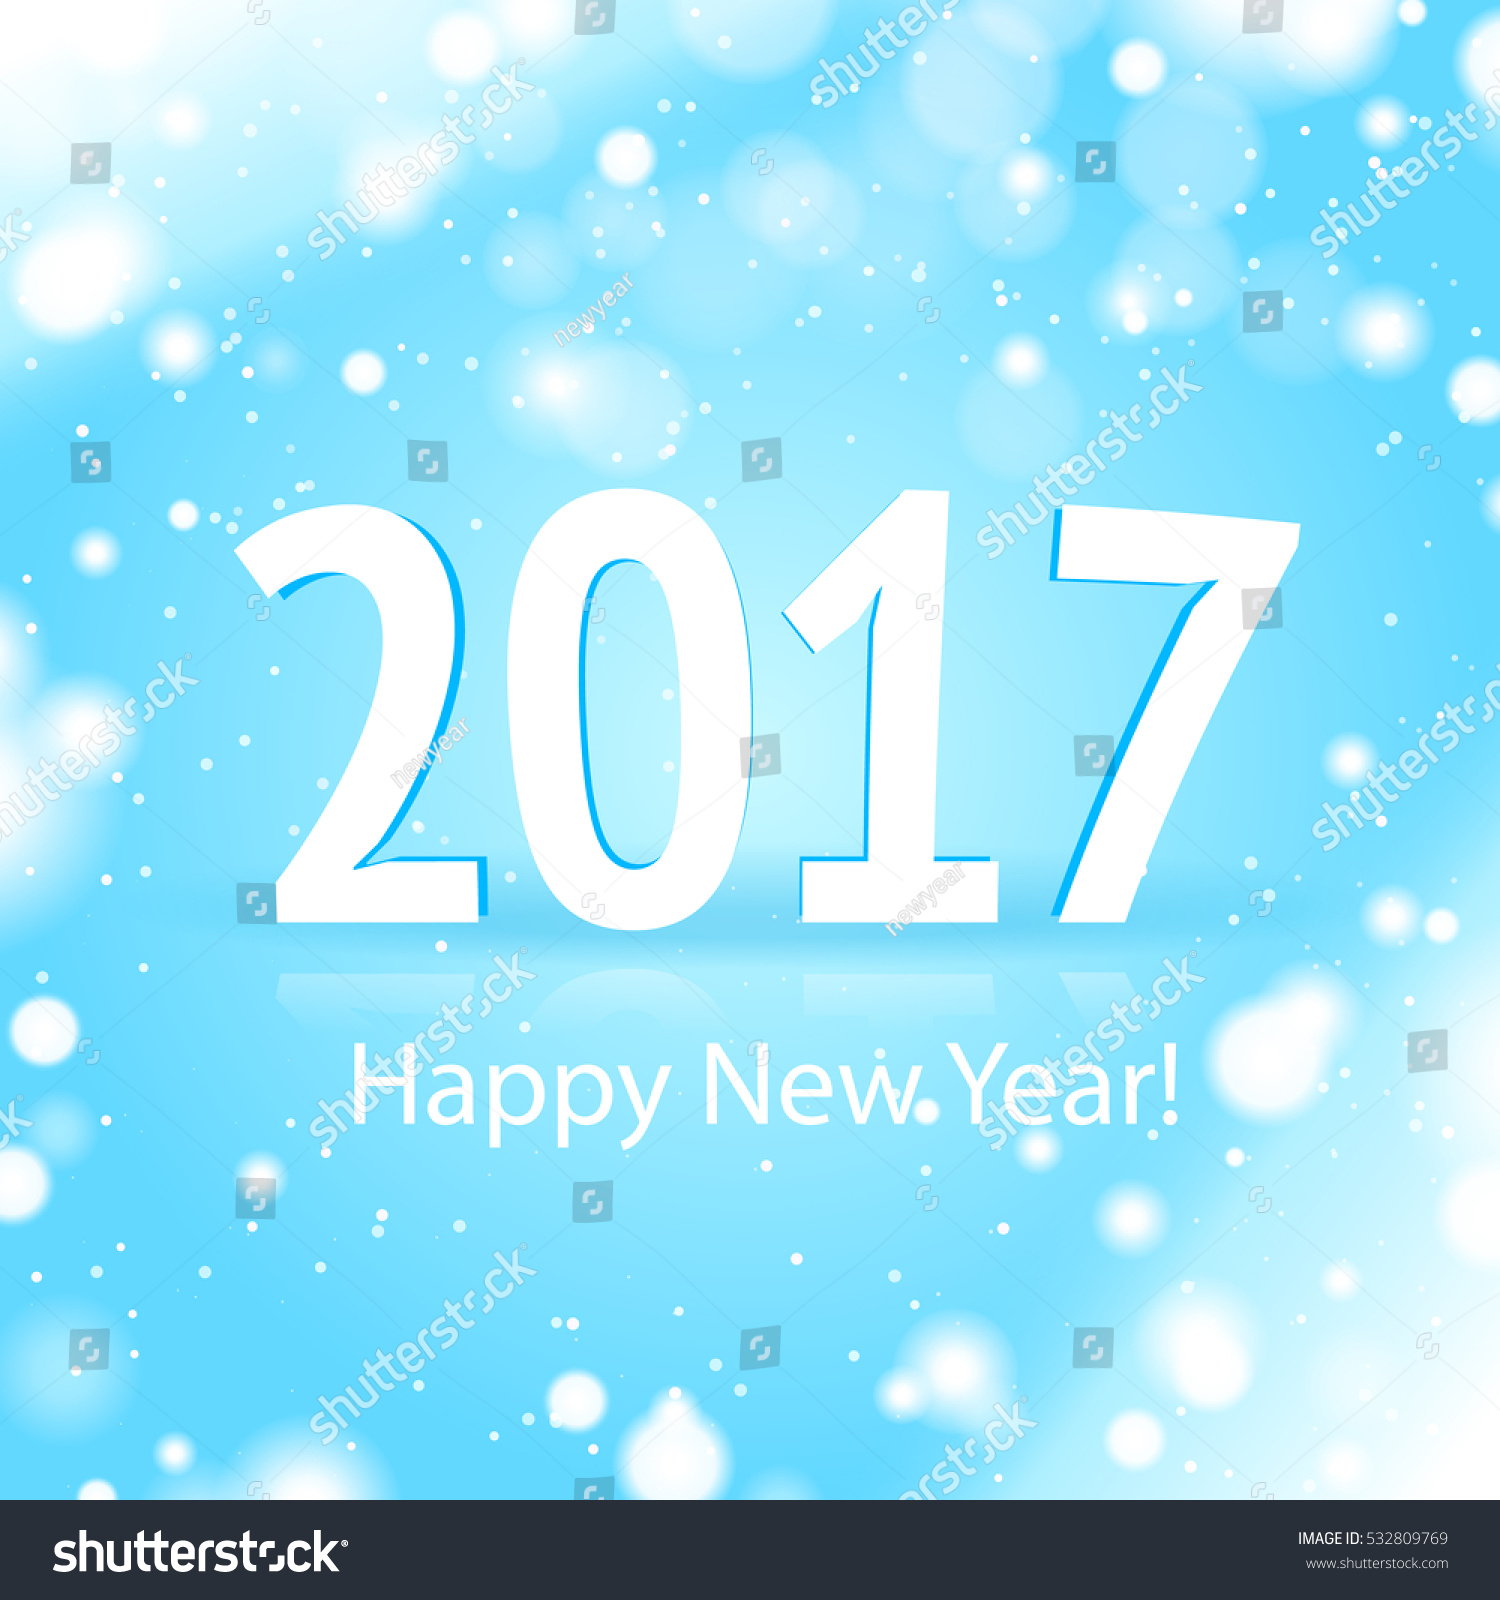 2017 Happy New Year Sign With Light Blue Background Stock Vector ...